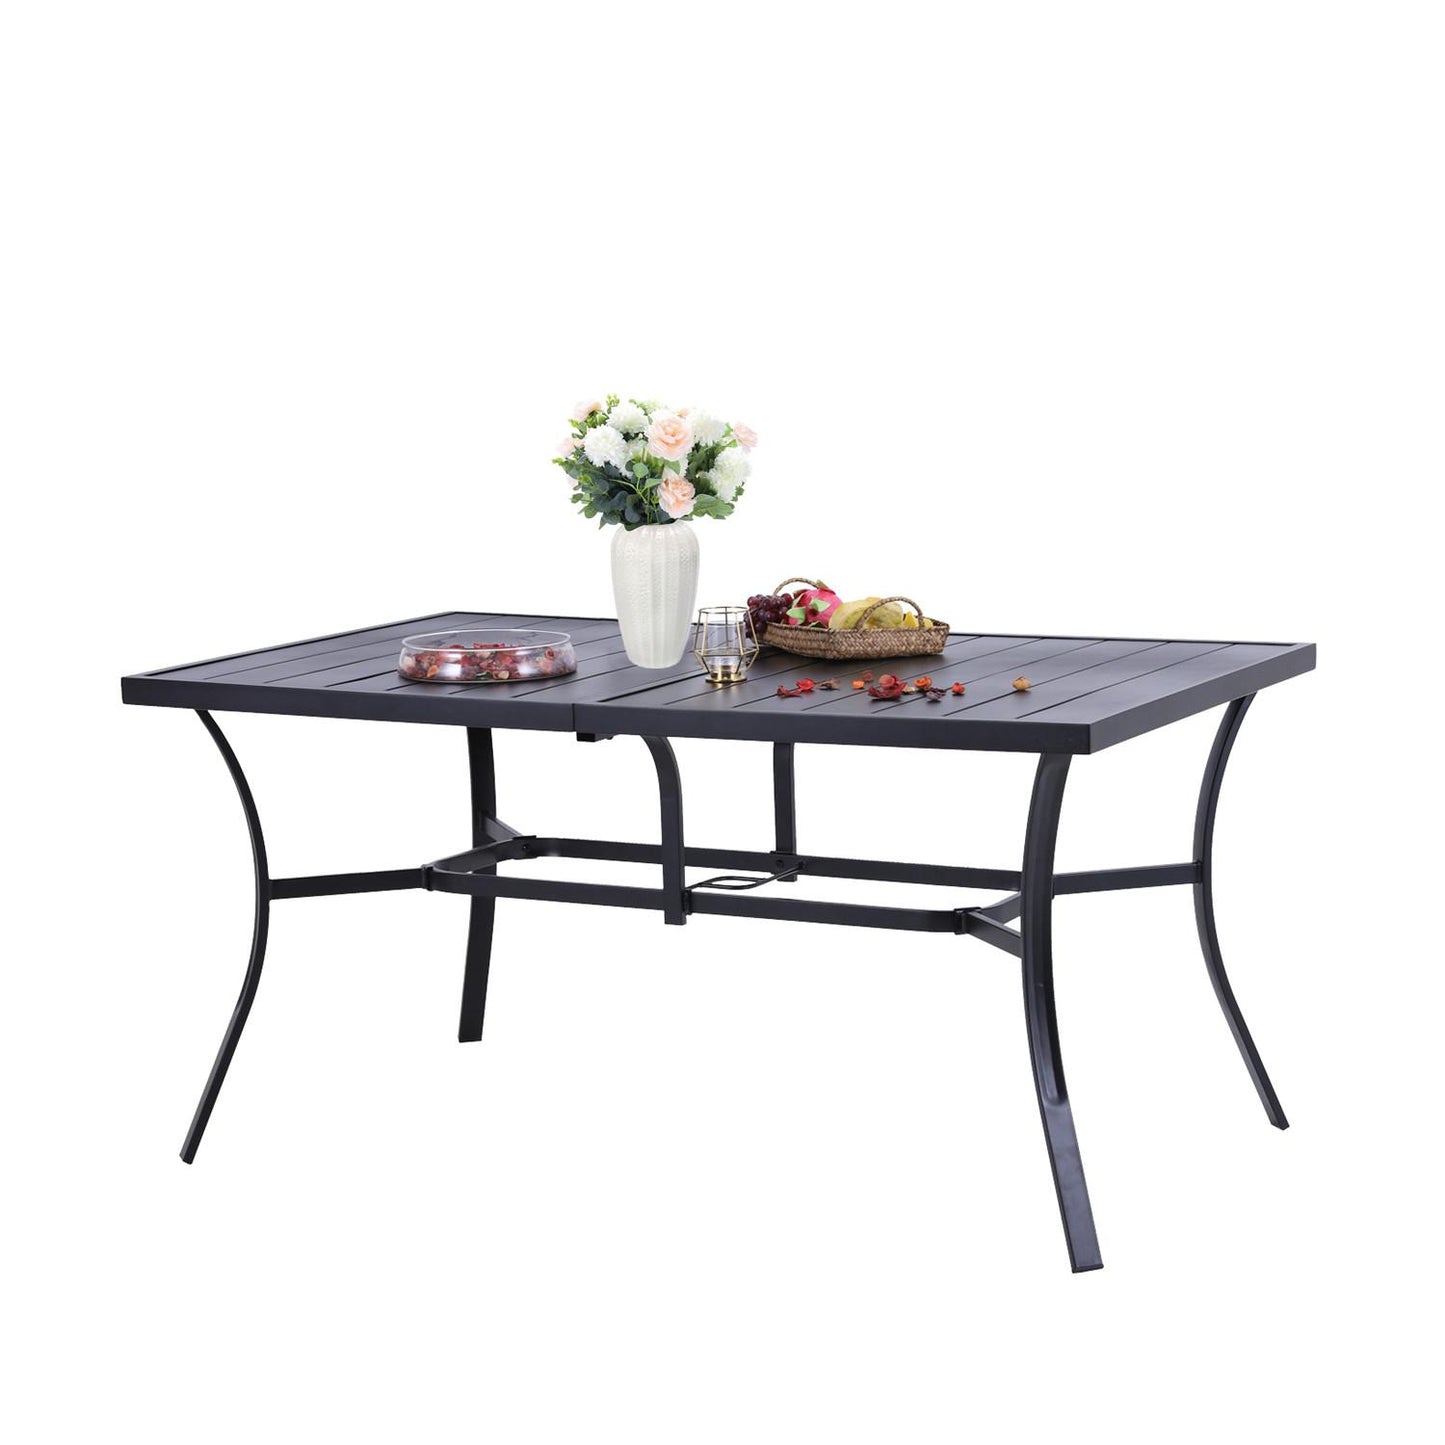 Sophia & William Outdoor Metal Rectangular Dining Table for 6 Chairs